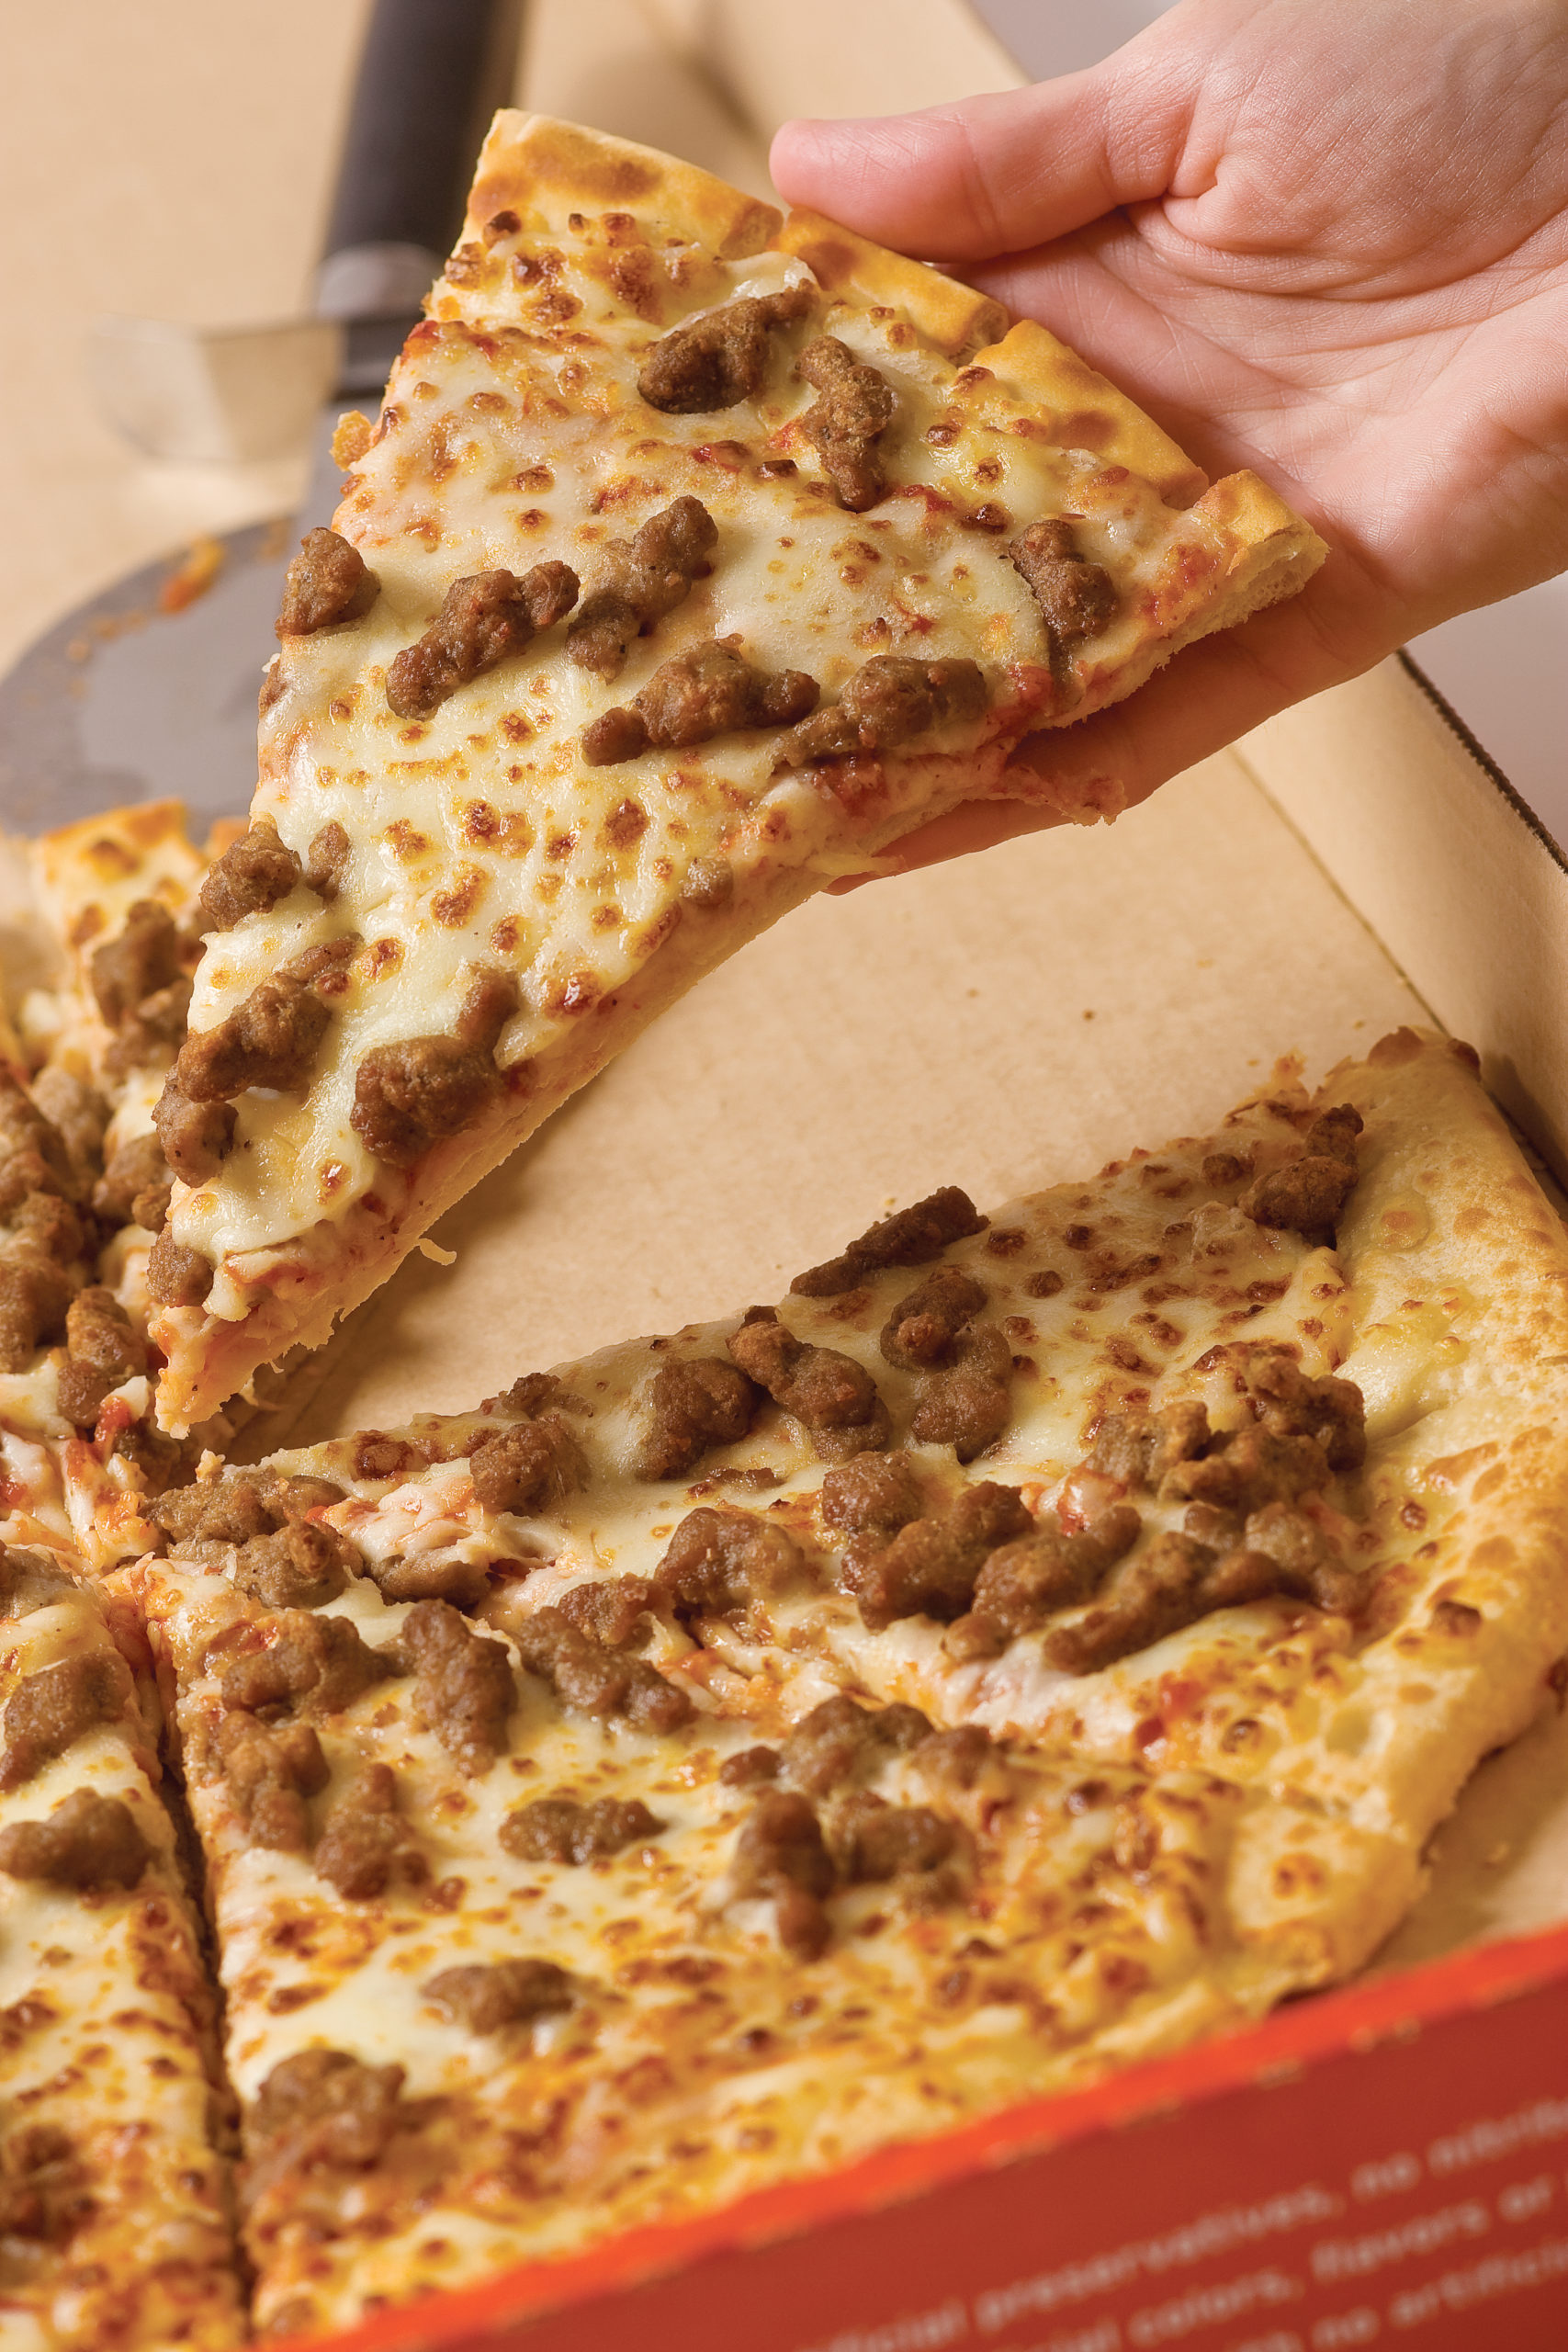 National Sausage Pizza Day - Yes there is a day for you sausage pizza lovers! So you one topping sausage pizza lovers, this day is for you. Go out and enjoy a sausage pizza! #SausagePizza #SausagePizzaDay